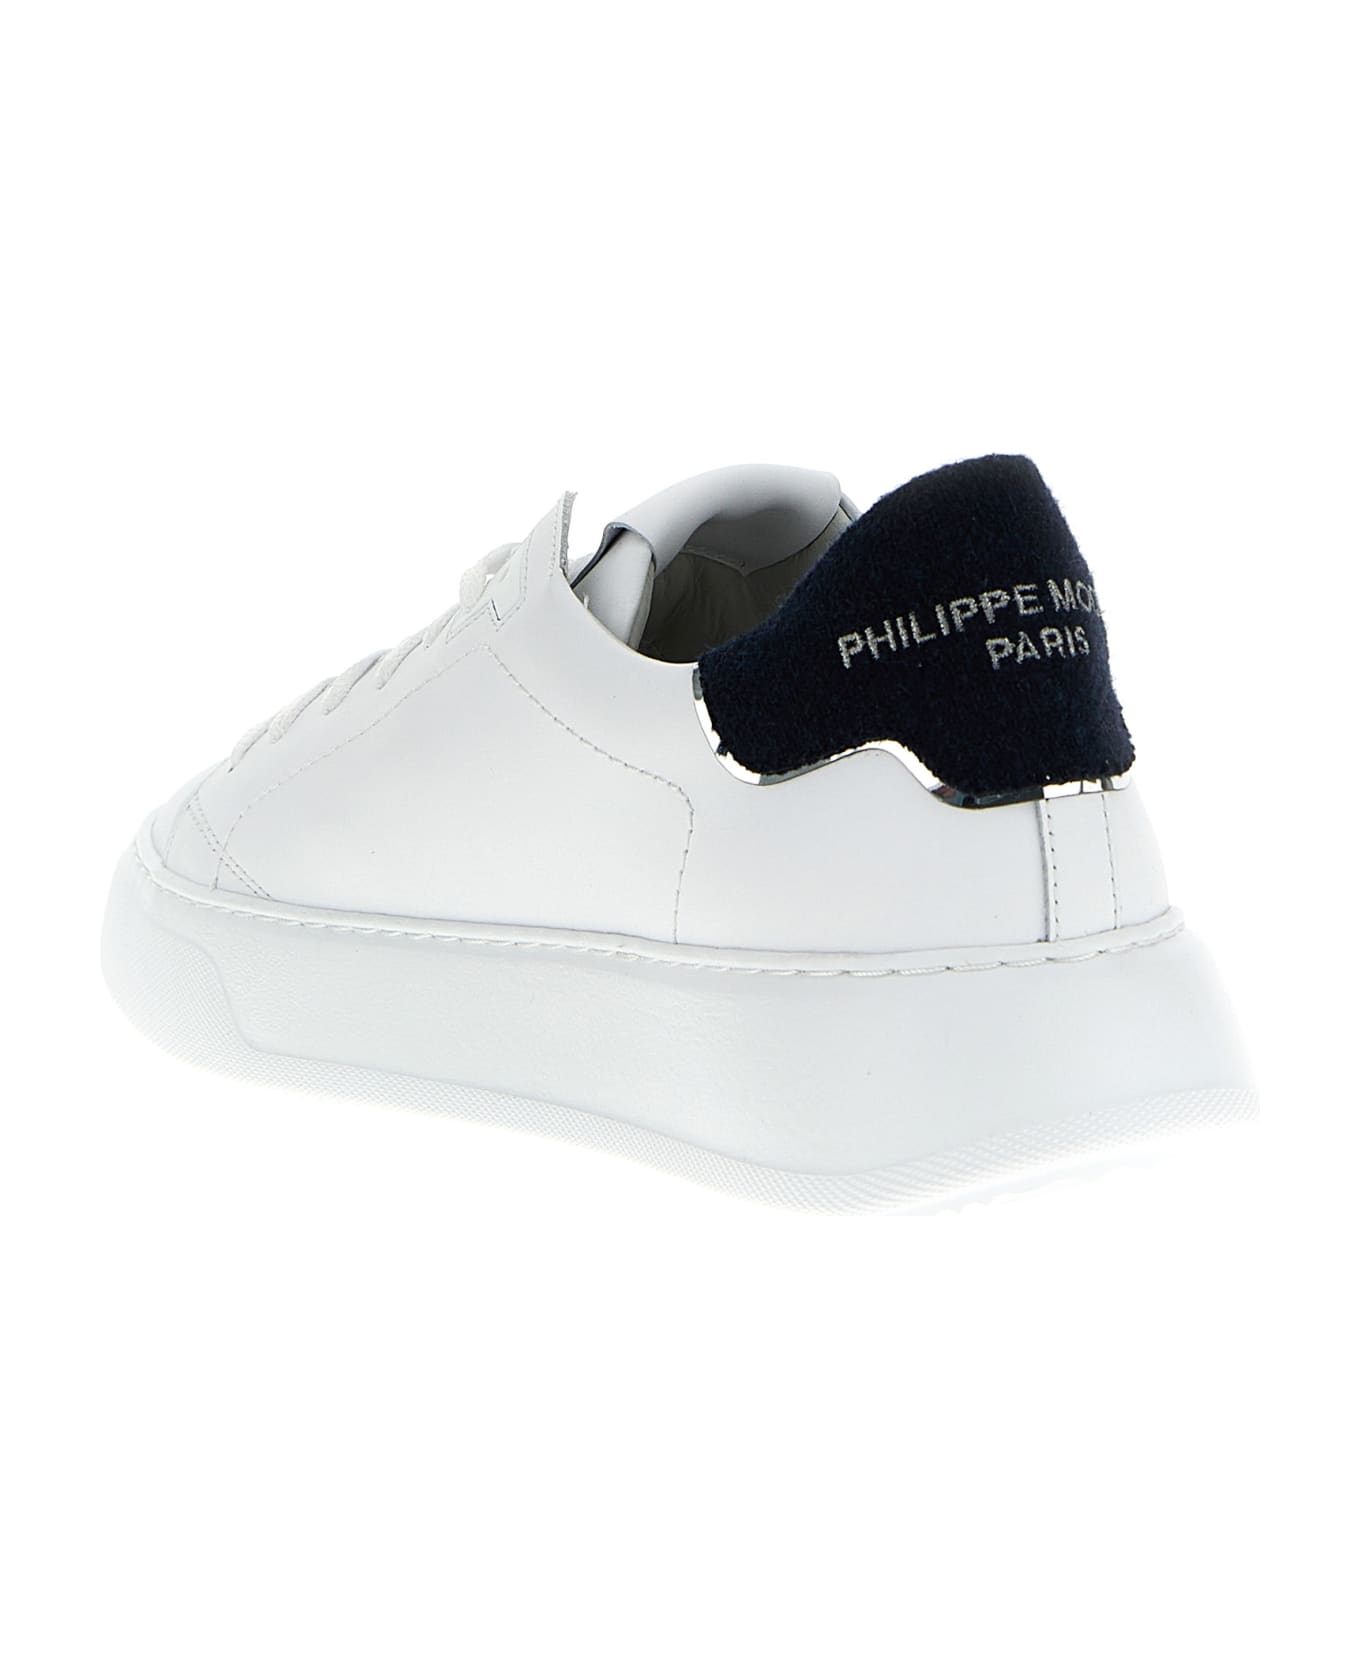 Philippe Model 'temple' Sneakers スニーカー